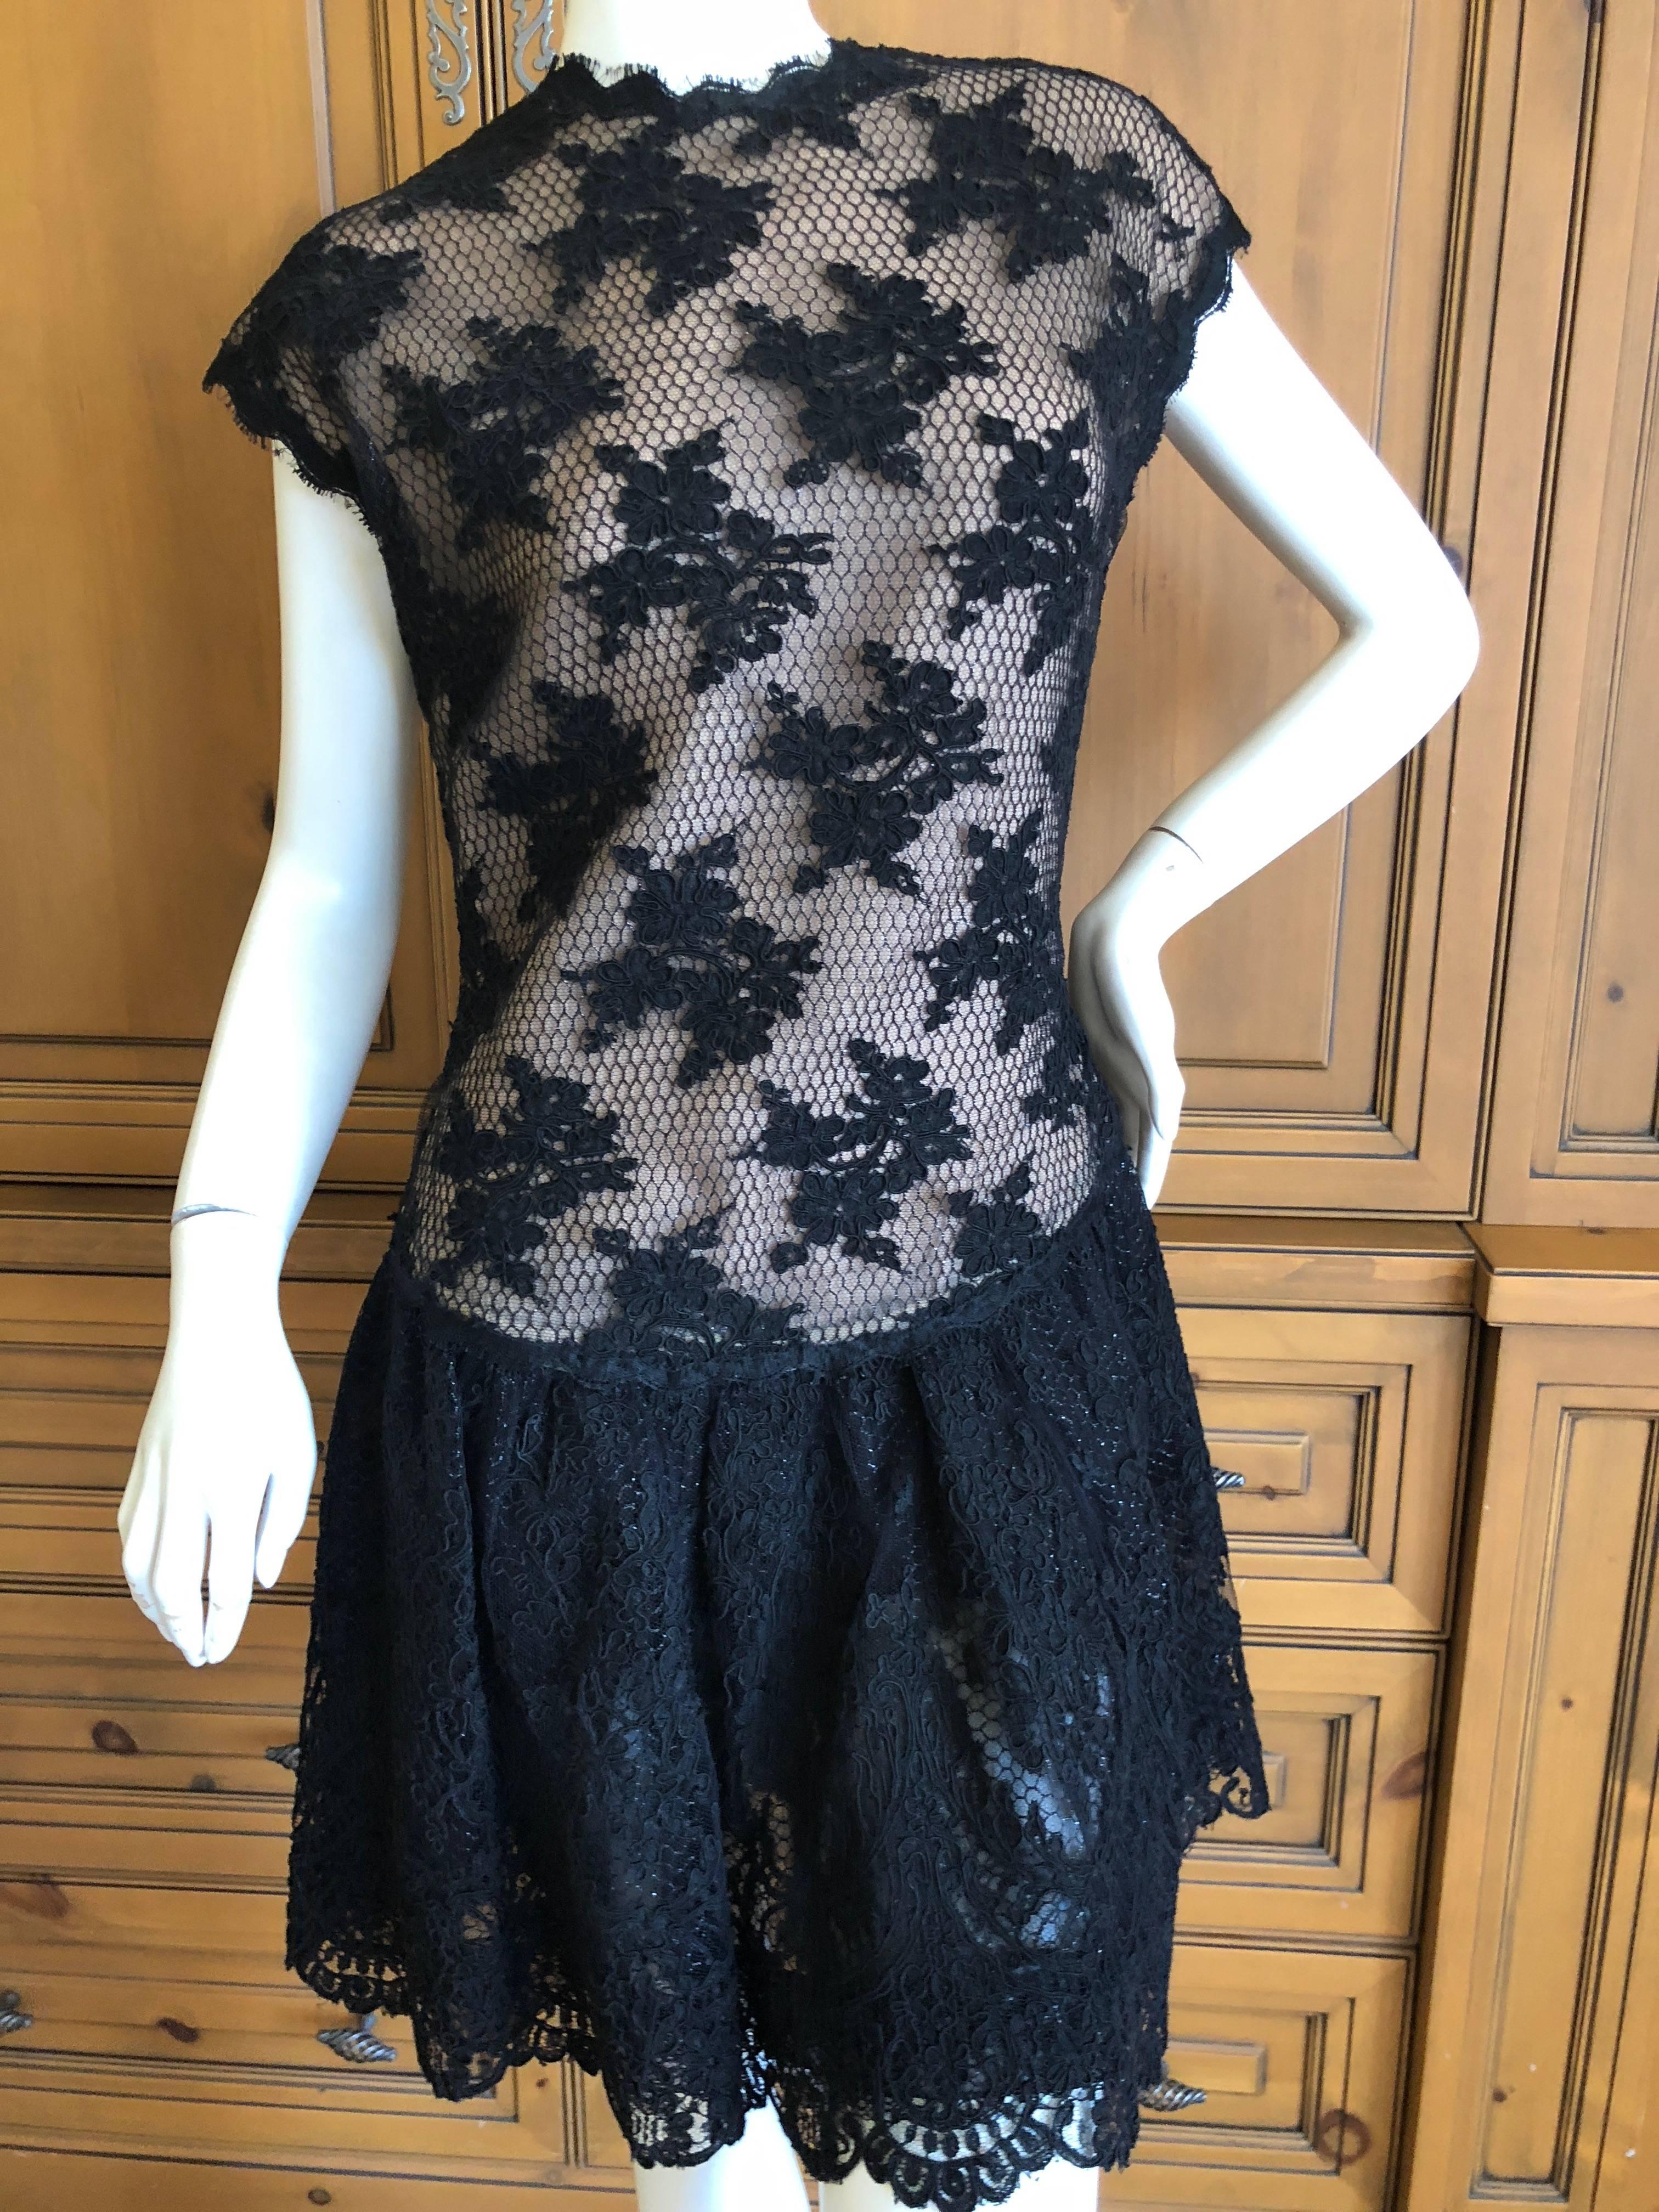 Geoffrey Beene Vintage Metallic Accented Lace Dress with Scallop Edges
Size 8
Bust 36